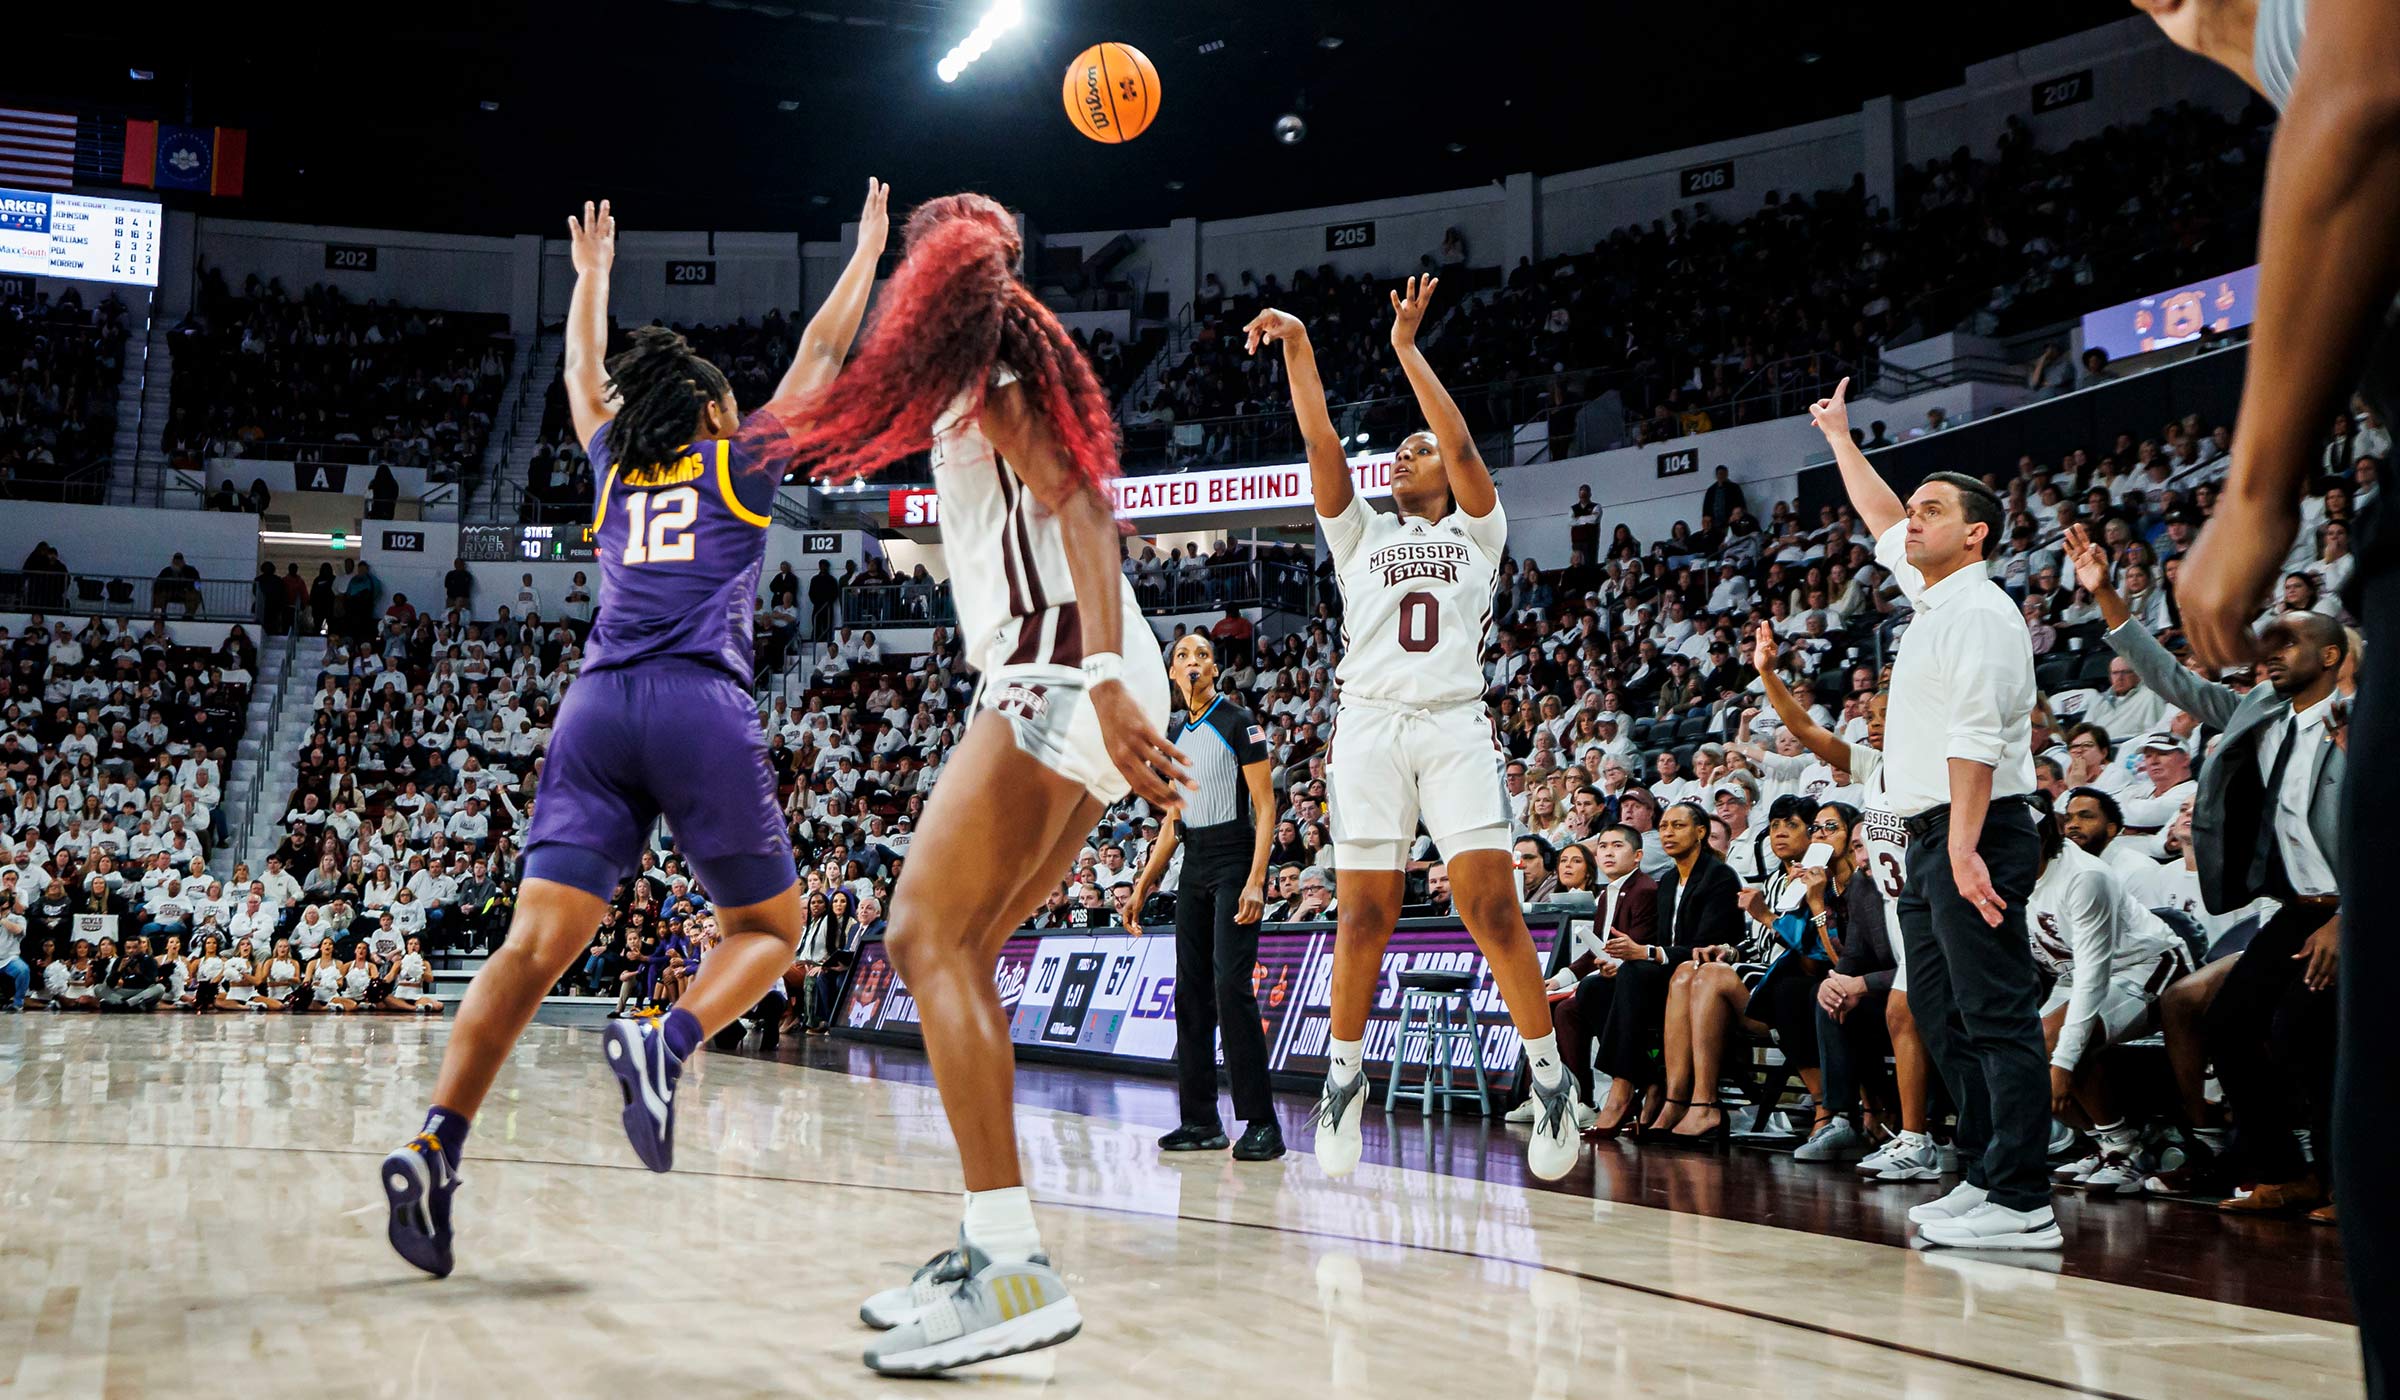 Women in white and purple basketball uniforms on the court